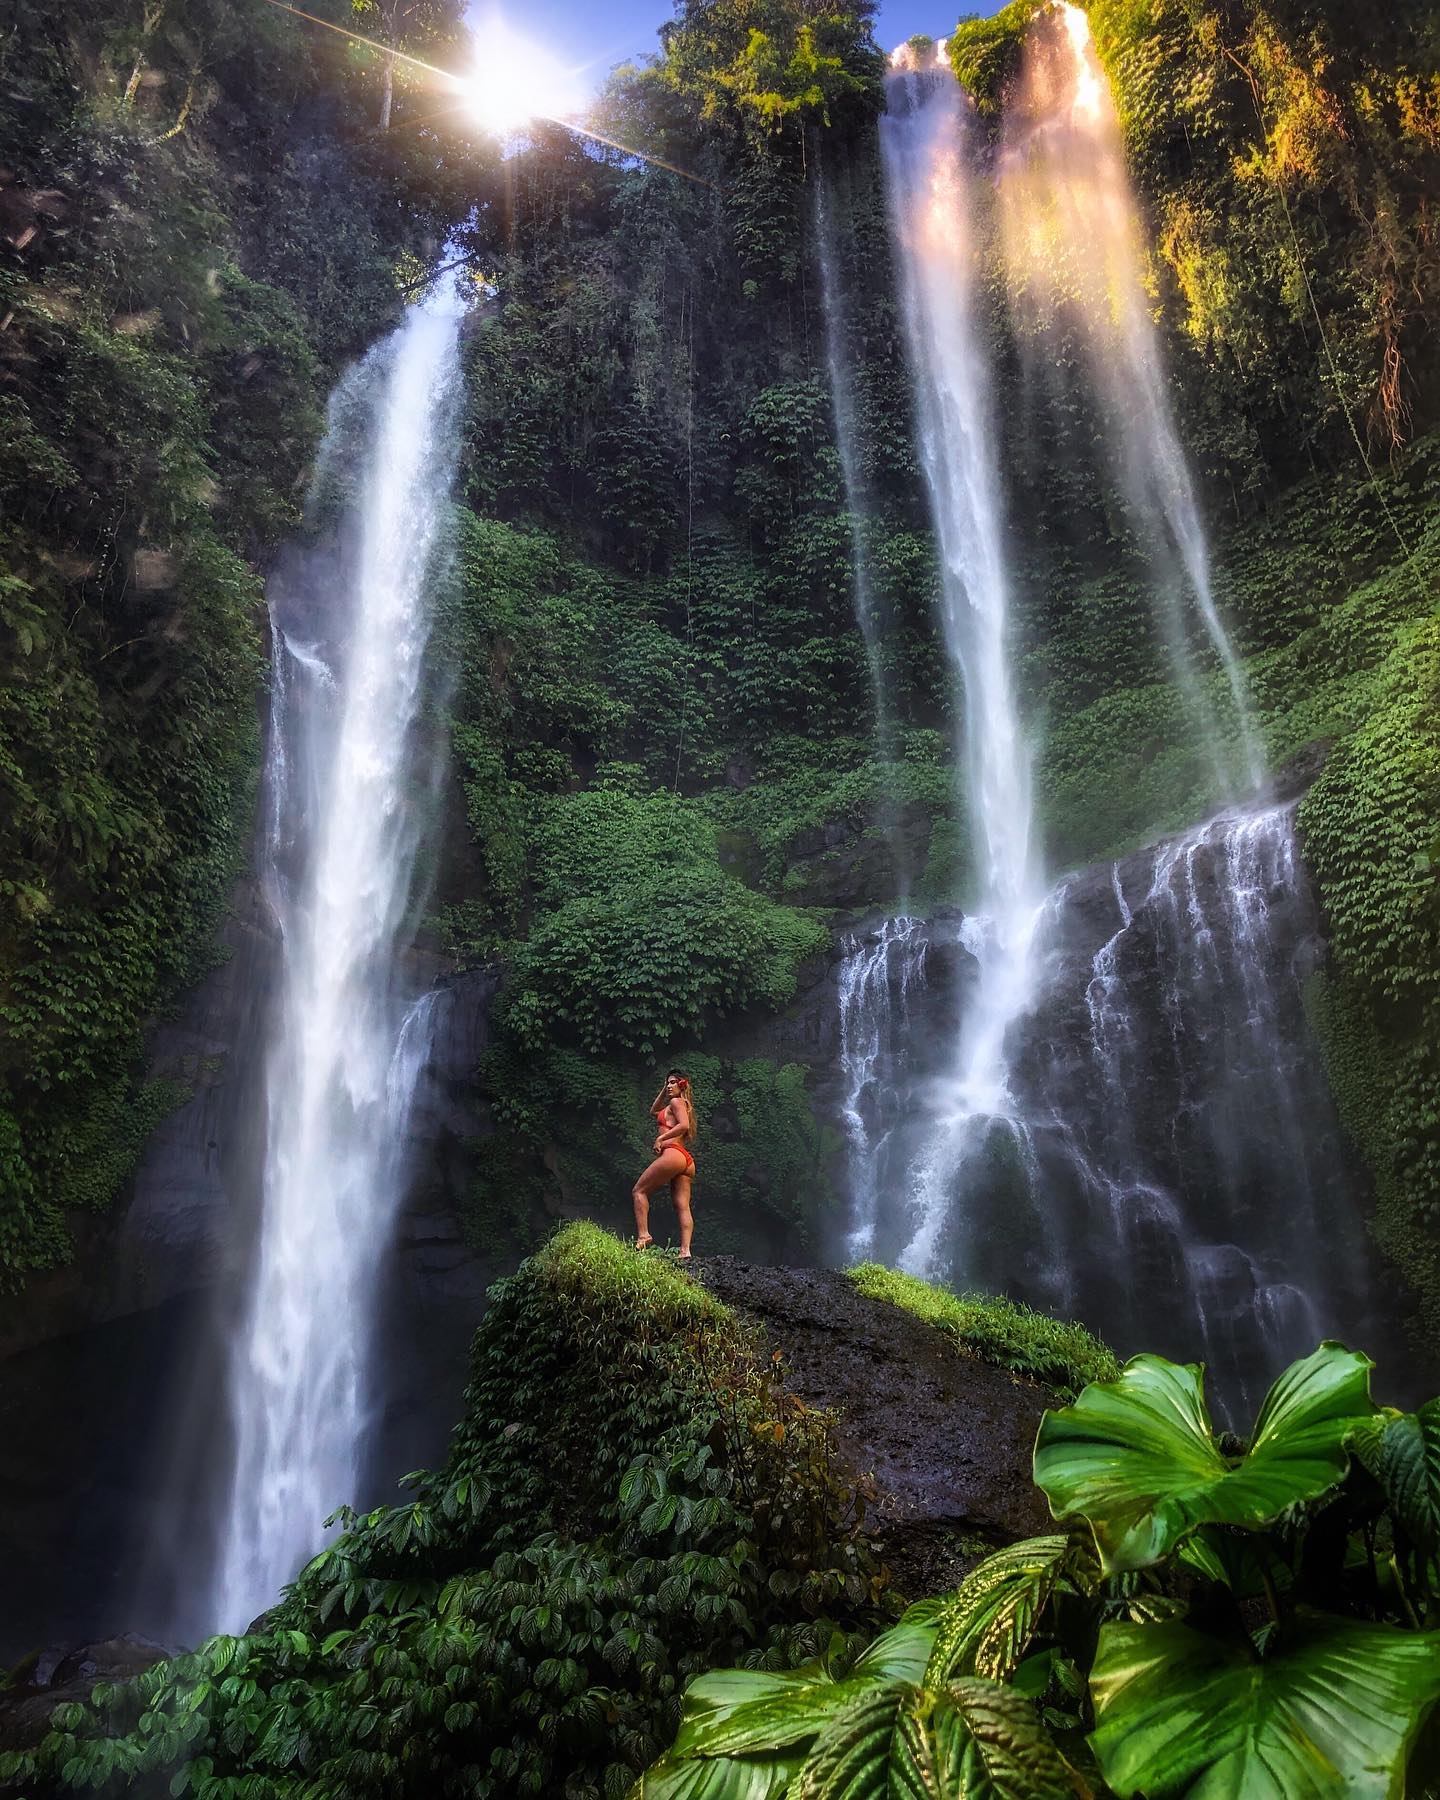 Beautiful Bali 🌴

The Sekumpul Waterfall is breathtaking. One of my favorite places on the island. 
I heard that it can be really crowded but I must confess that I haven’t met many people there and I stayed there almost the whole day. I started really early in the morning, afraid of the crowds that could destroy my lone happiness. It was really worth it watching the sunrise at this magical place.
.
.
📸by @ingowillich .
.
#bali #baliindonesia #sekumpulwaterfall #waterfall #explorebali #balidaily #speechlessplaces #jungle #travel #travelblogger #travelgram #travelgirl #nomad #sheisnotlost #wanderlust #baligasm #baliwaterfall #ubud #ubudbali